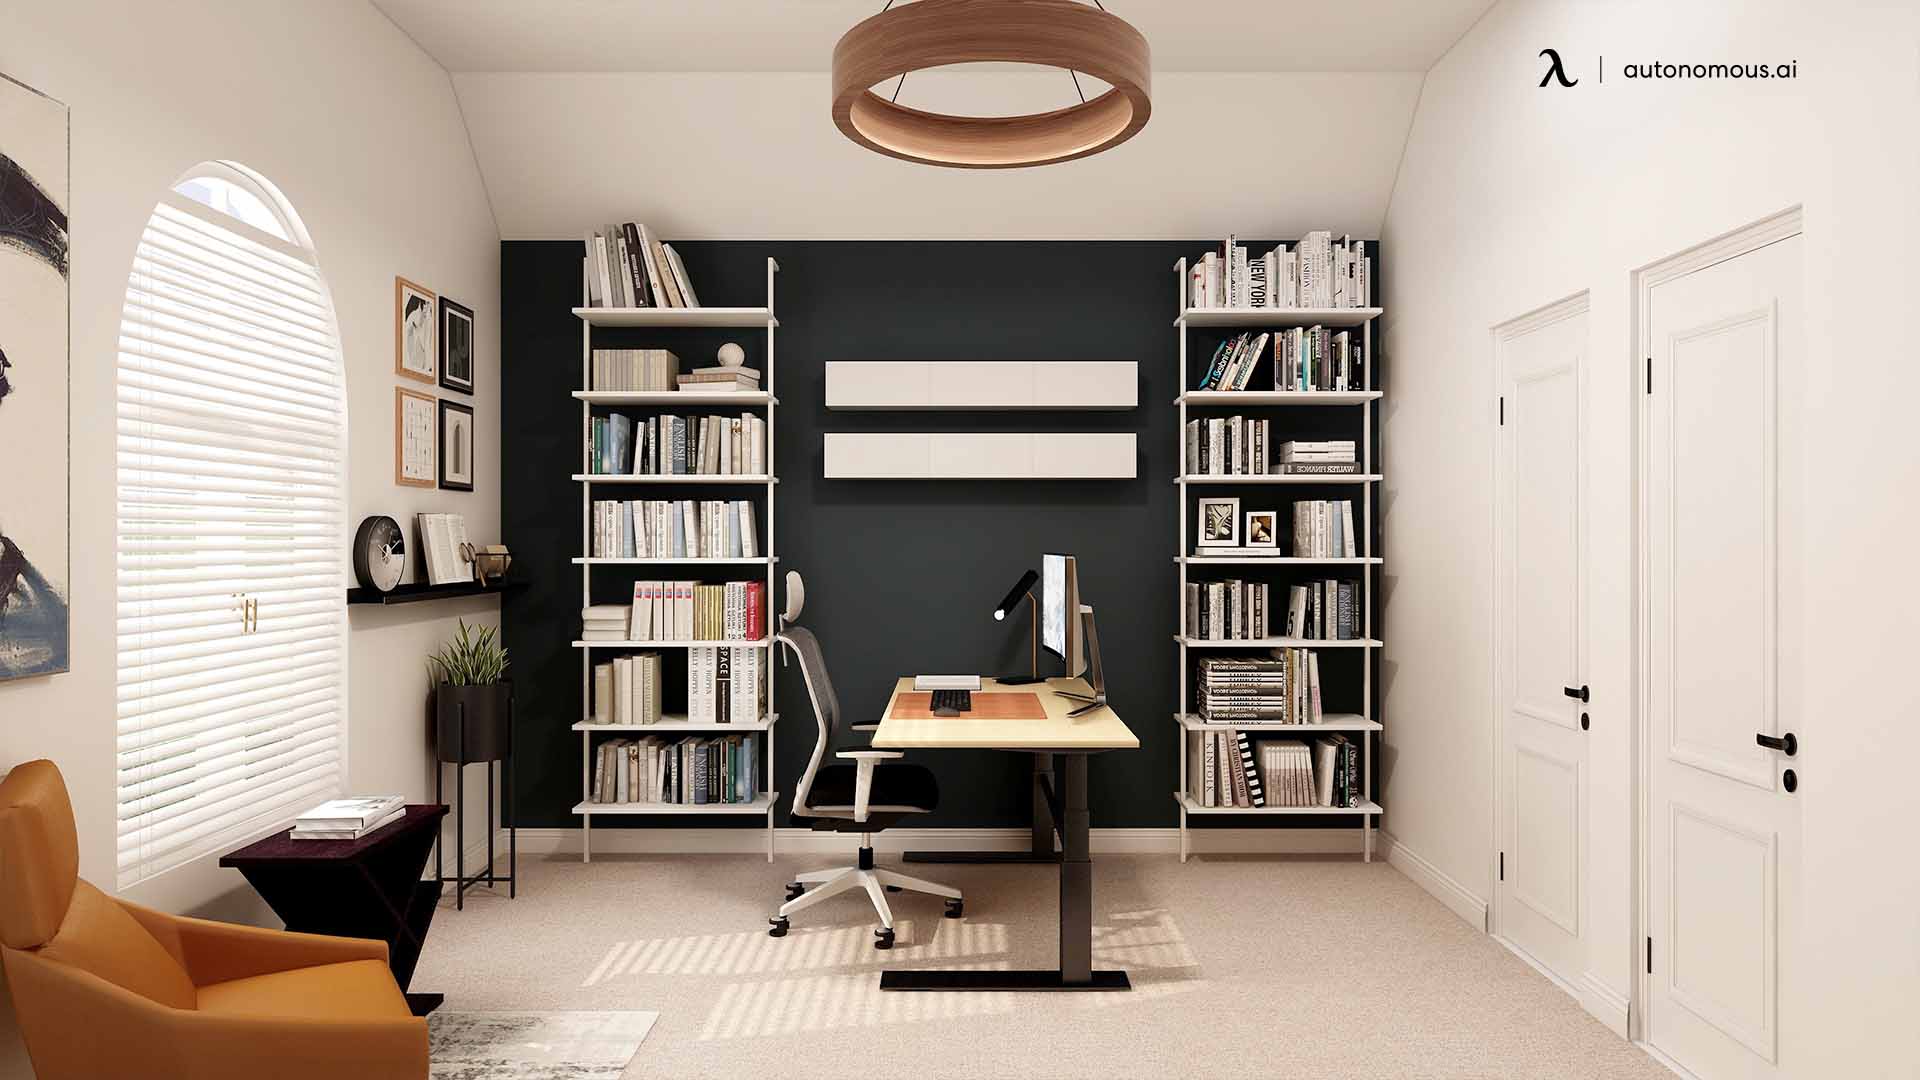 Best Home Office Desk Placement - Which One Suits You the Most?